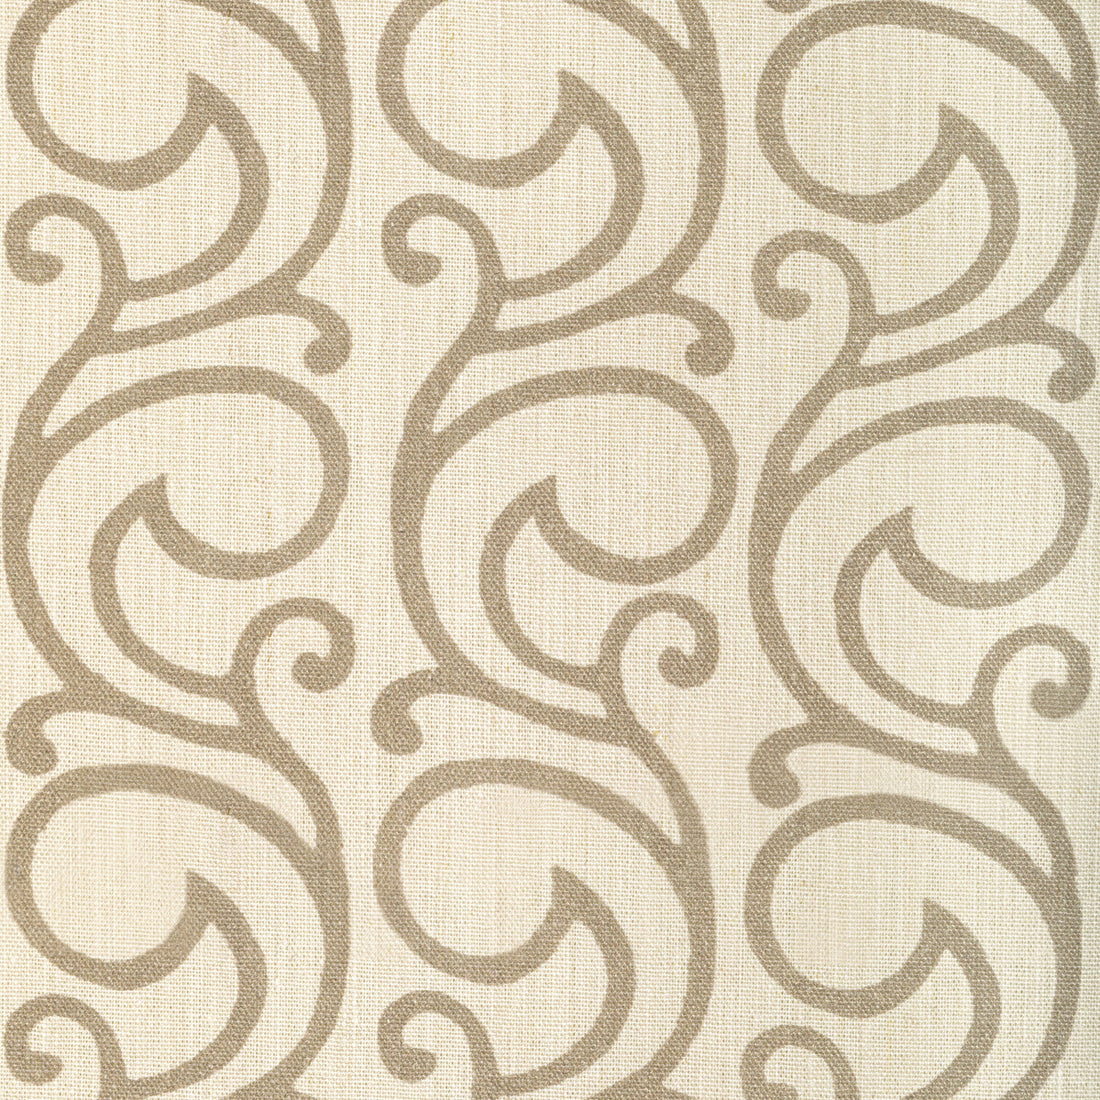 Serendipity Scroll fabric in oak color - pattern 2022103.106.0 - by Lee Jofa in the Sarah Bartholomew collection